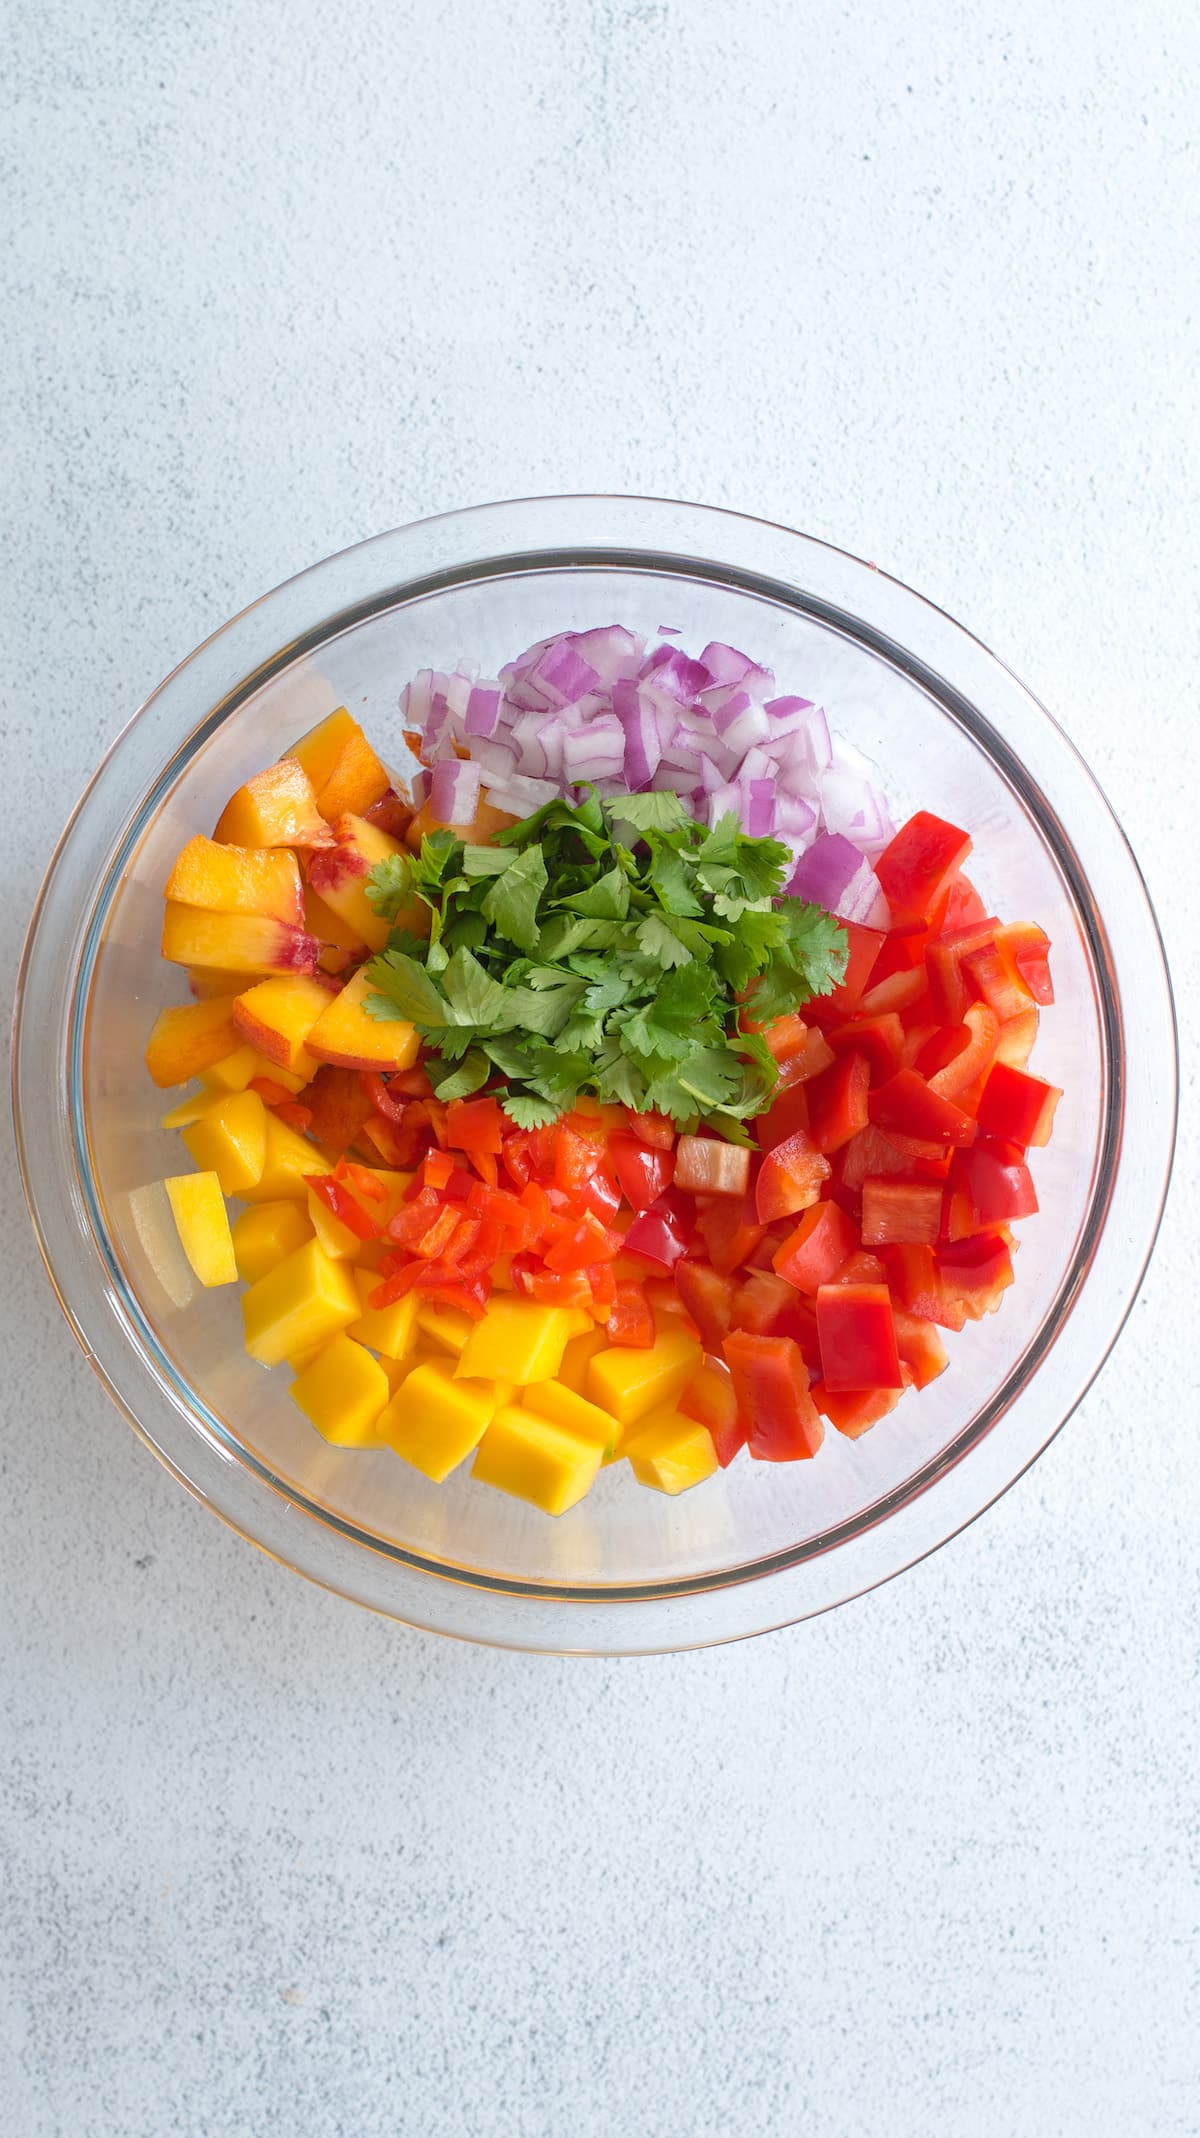 diced peaches, mangos, cilantro, habanero pepper, red onion, and red bell pepper in a bowl